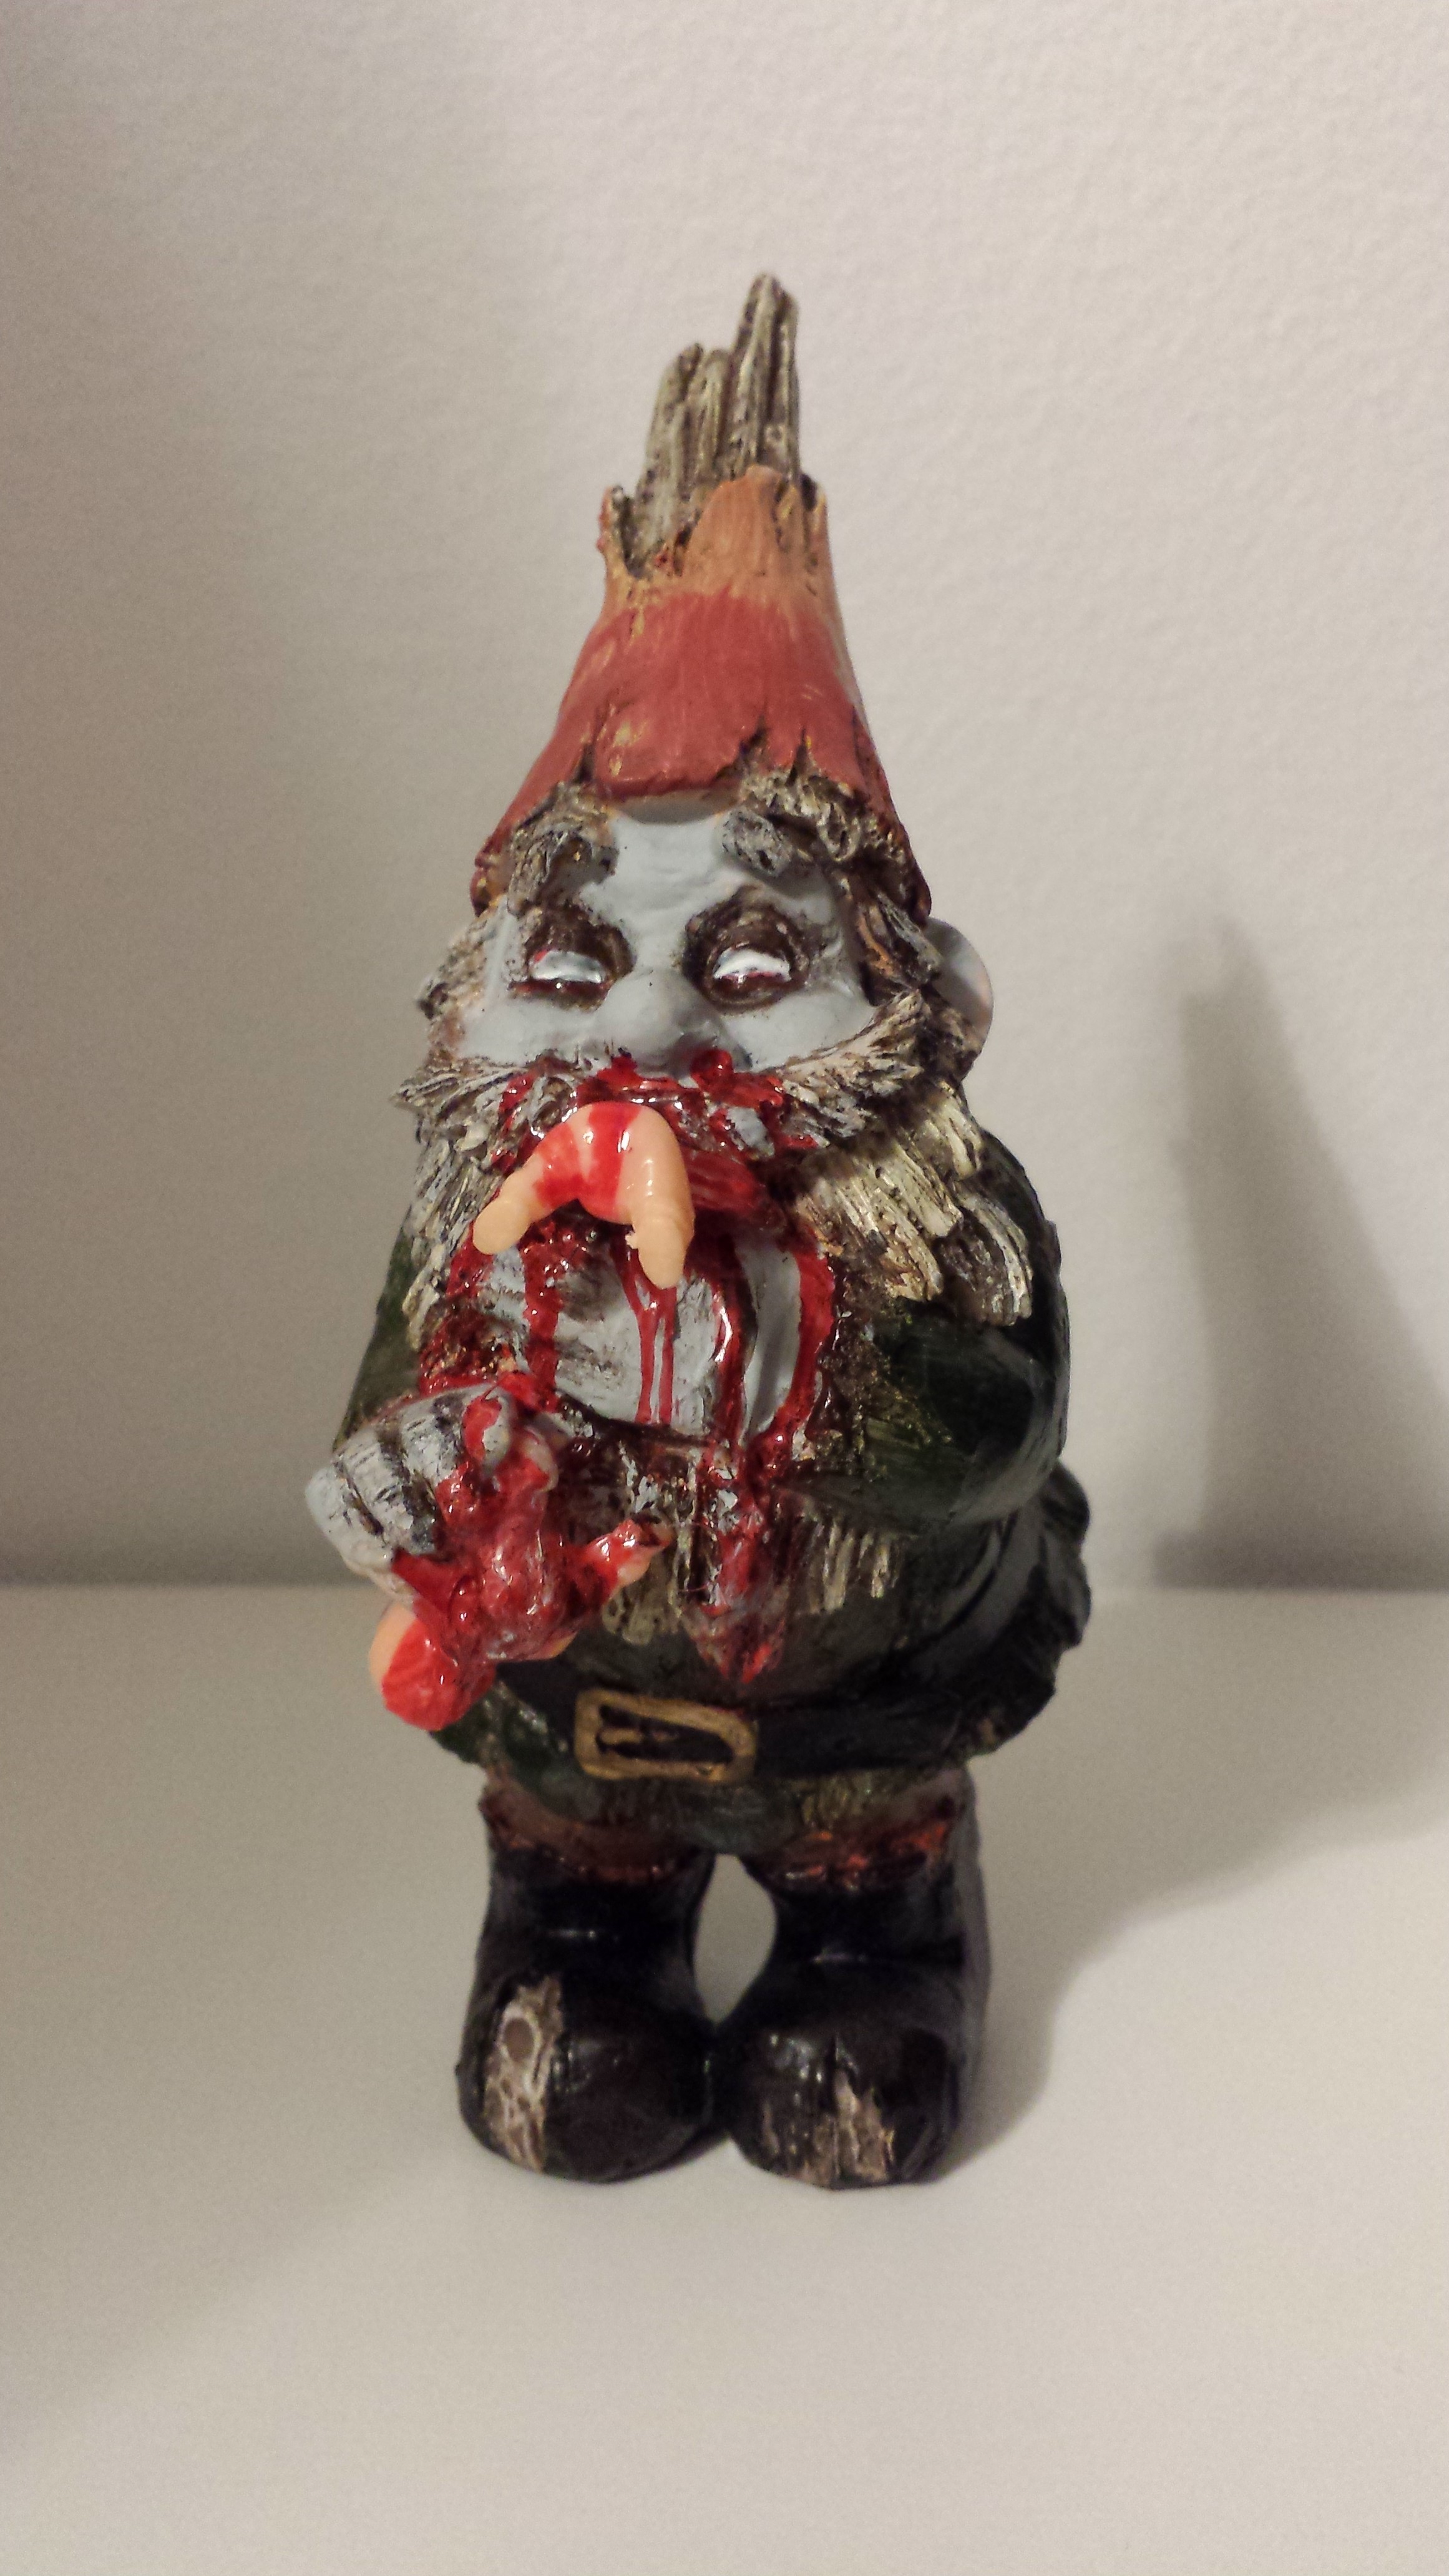 Gnomes protect your flowers...by eating the babies that crawl by! Another gory custom from Curious Goods.